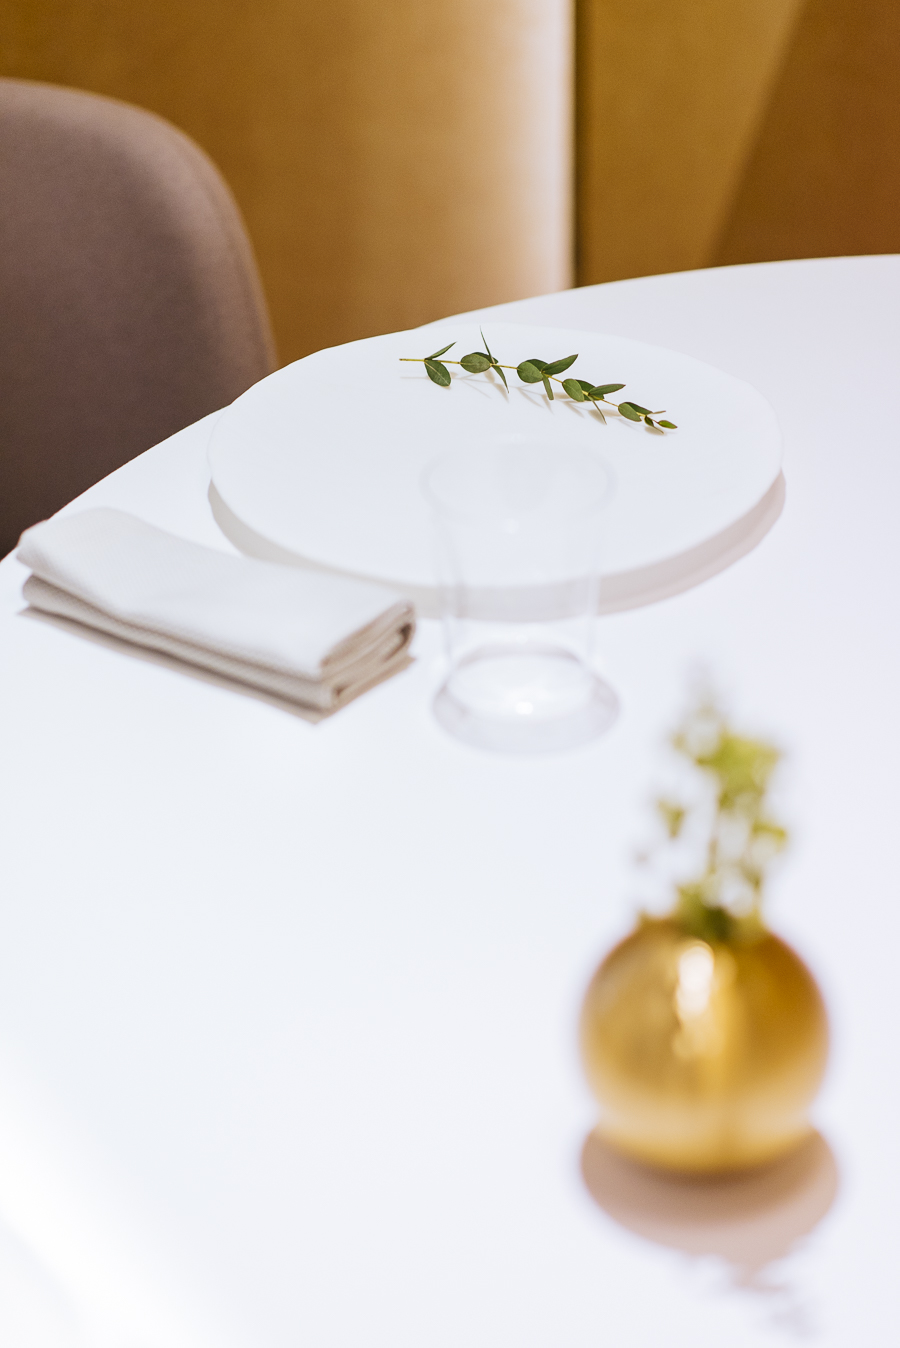 table setting of odette restaurant national gallery singapore